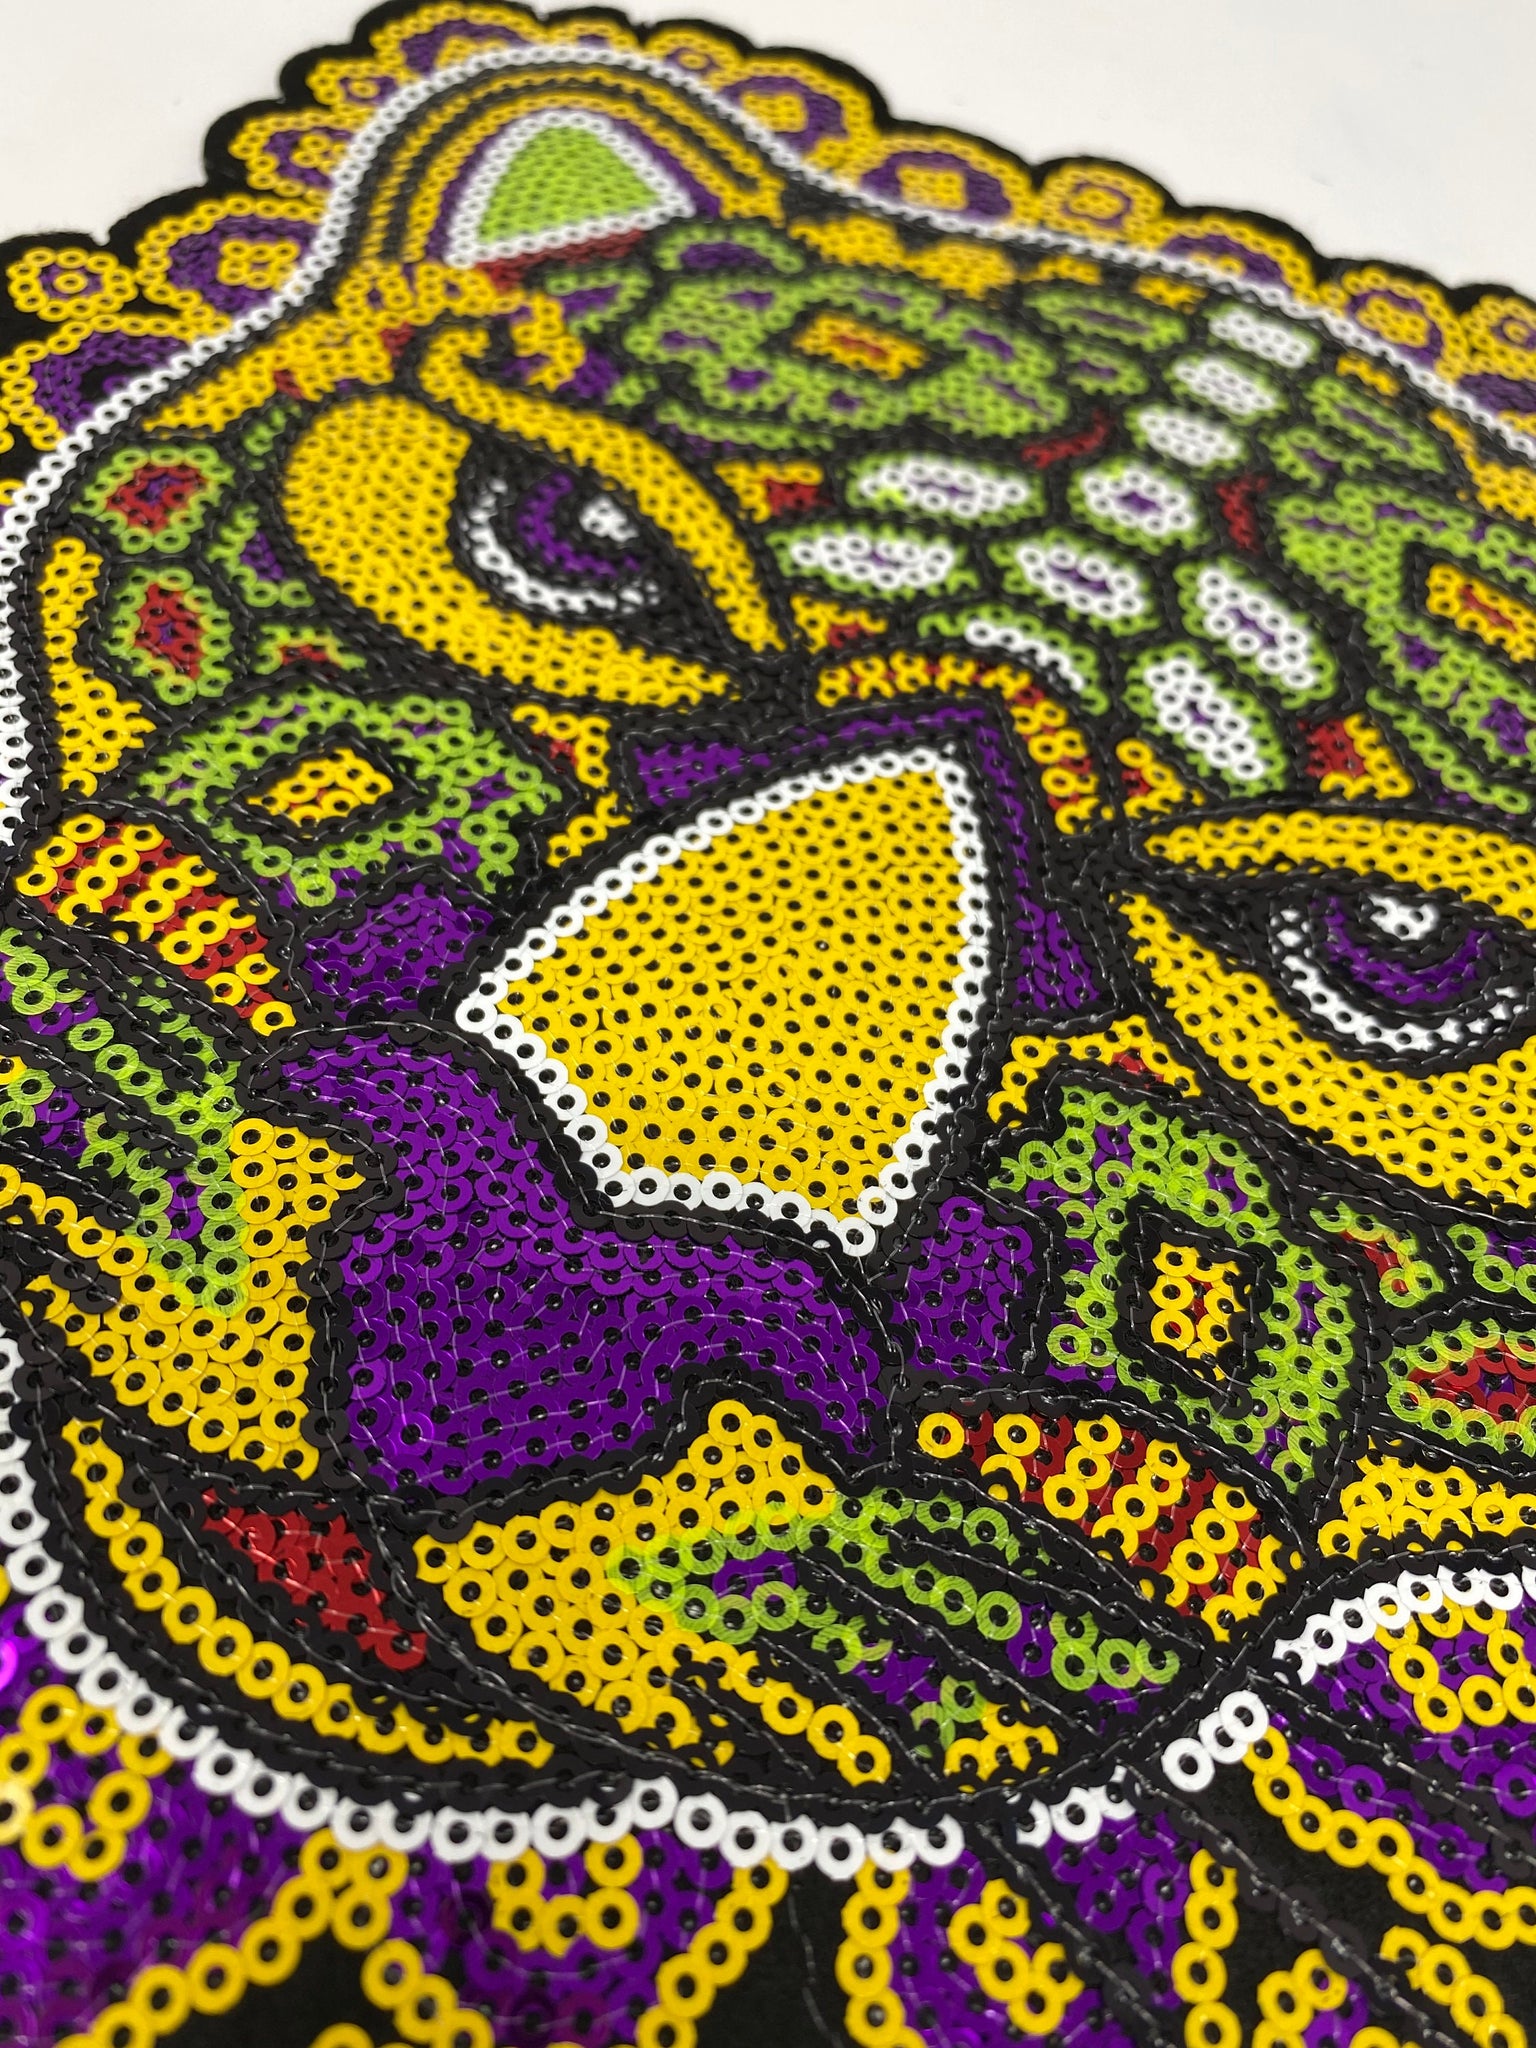 New Arrival, Purple, Green & Yellow Sequins "Panther" Head Iron-On Patch, Large Patch; Bling Patch, DIY Applique; Multicolor Patch, Size 9"